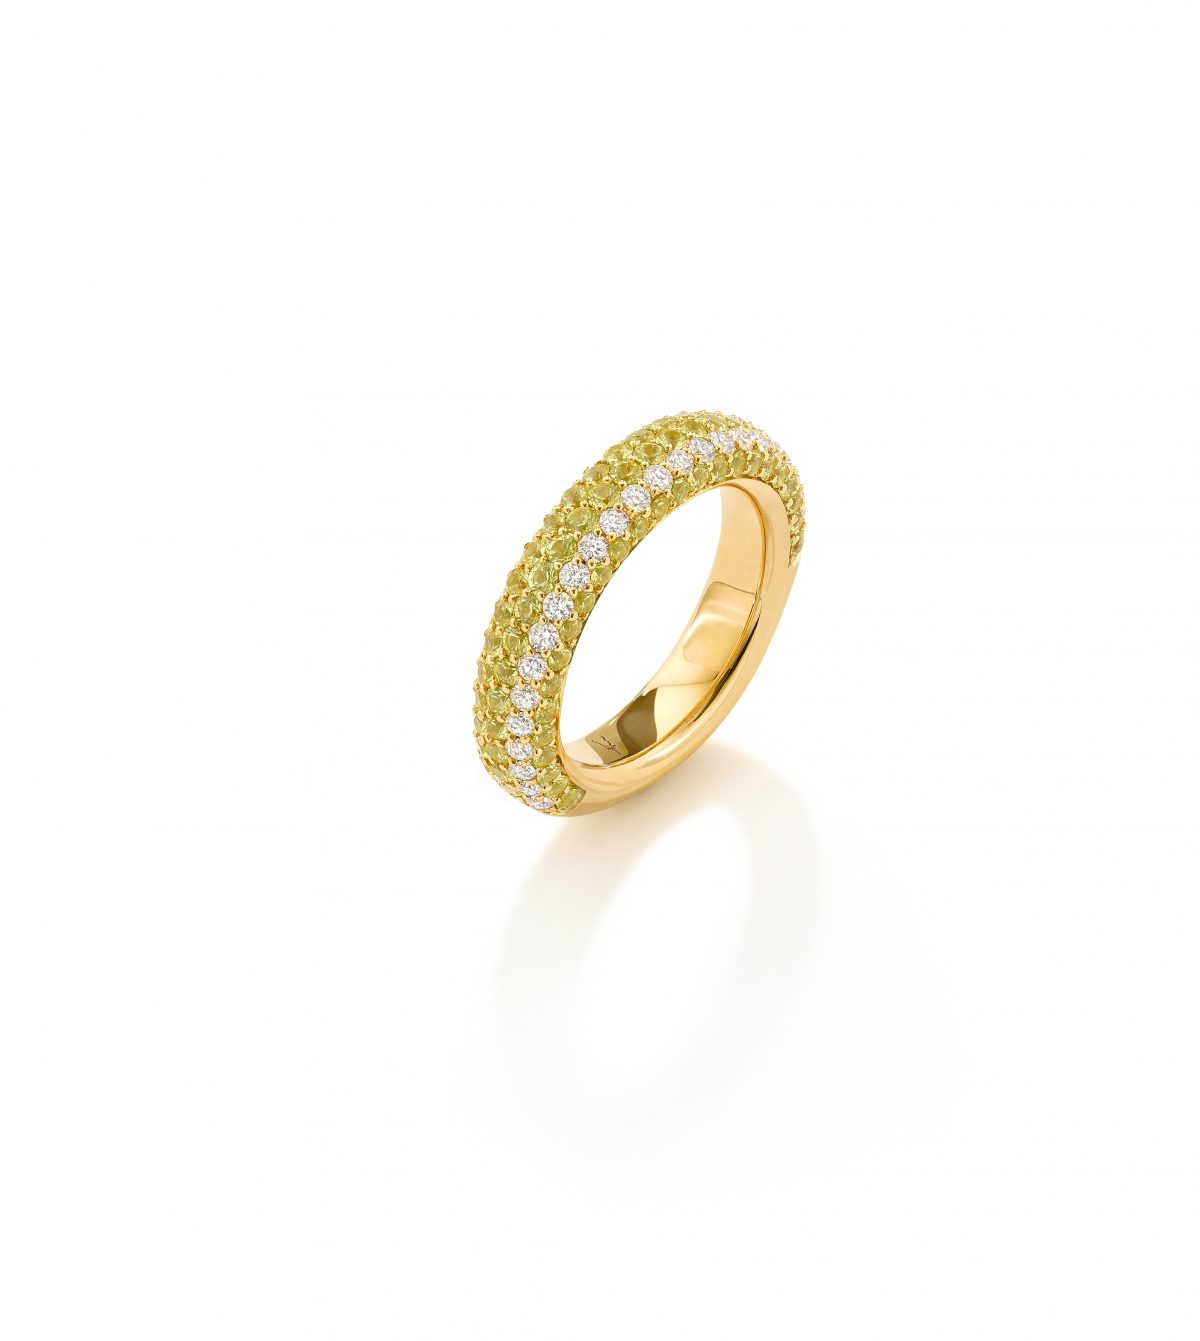 Tropic ring set with diamonds and yellow sapphires